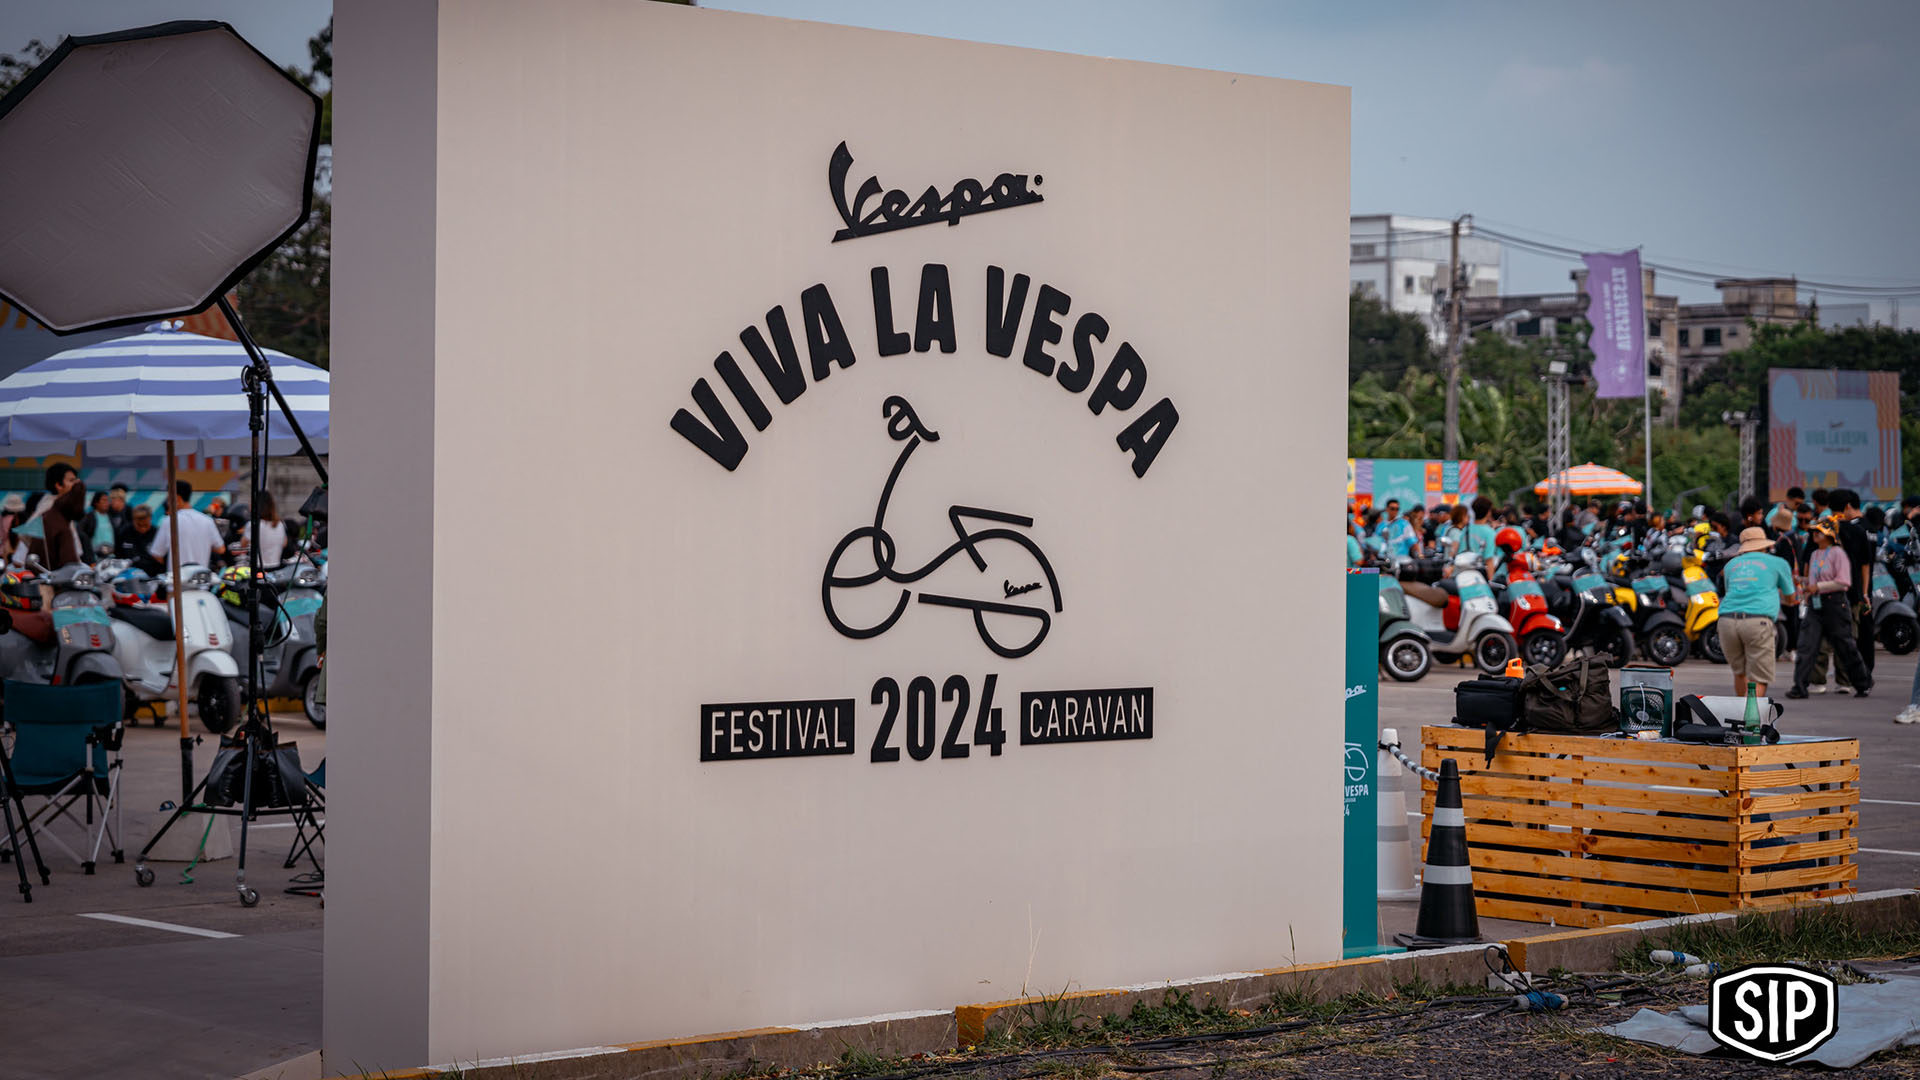 An unforgettable Vespa experience in Bangkok 2024